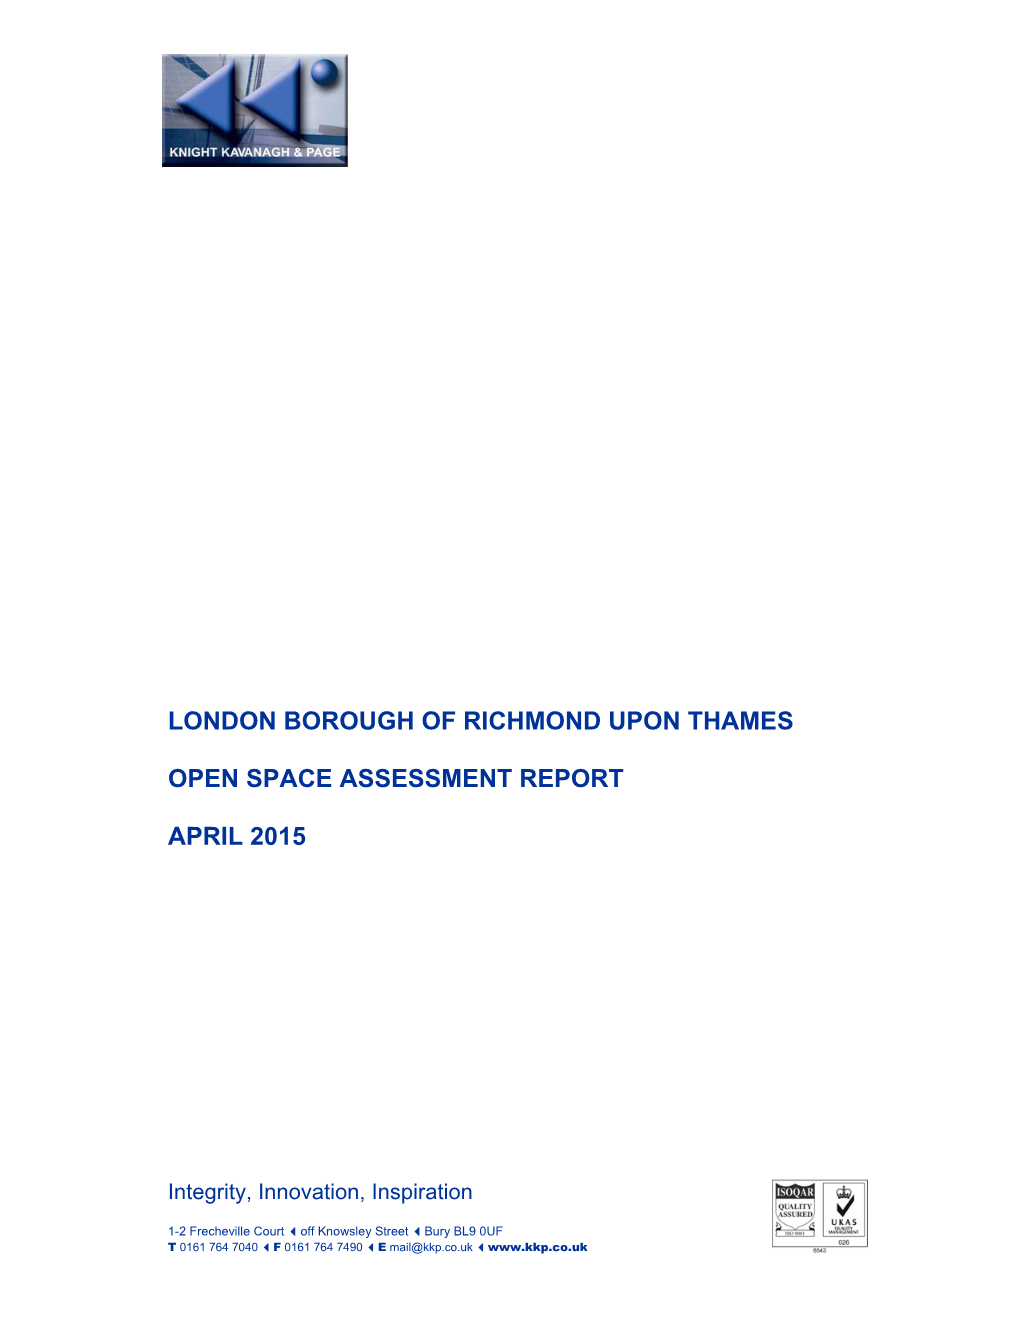 Open Space Assessment 2015